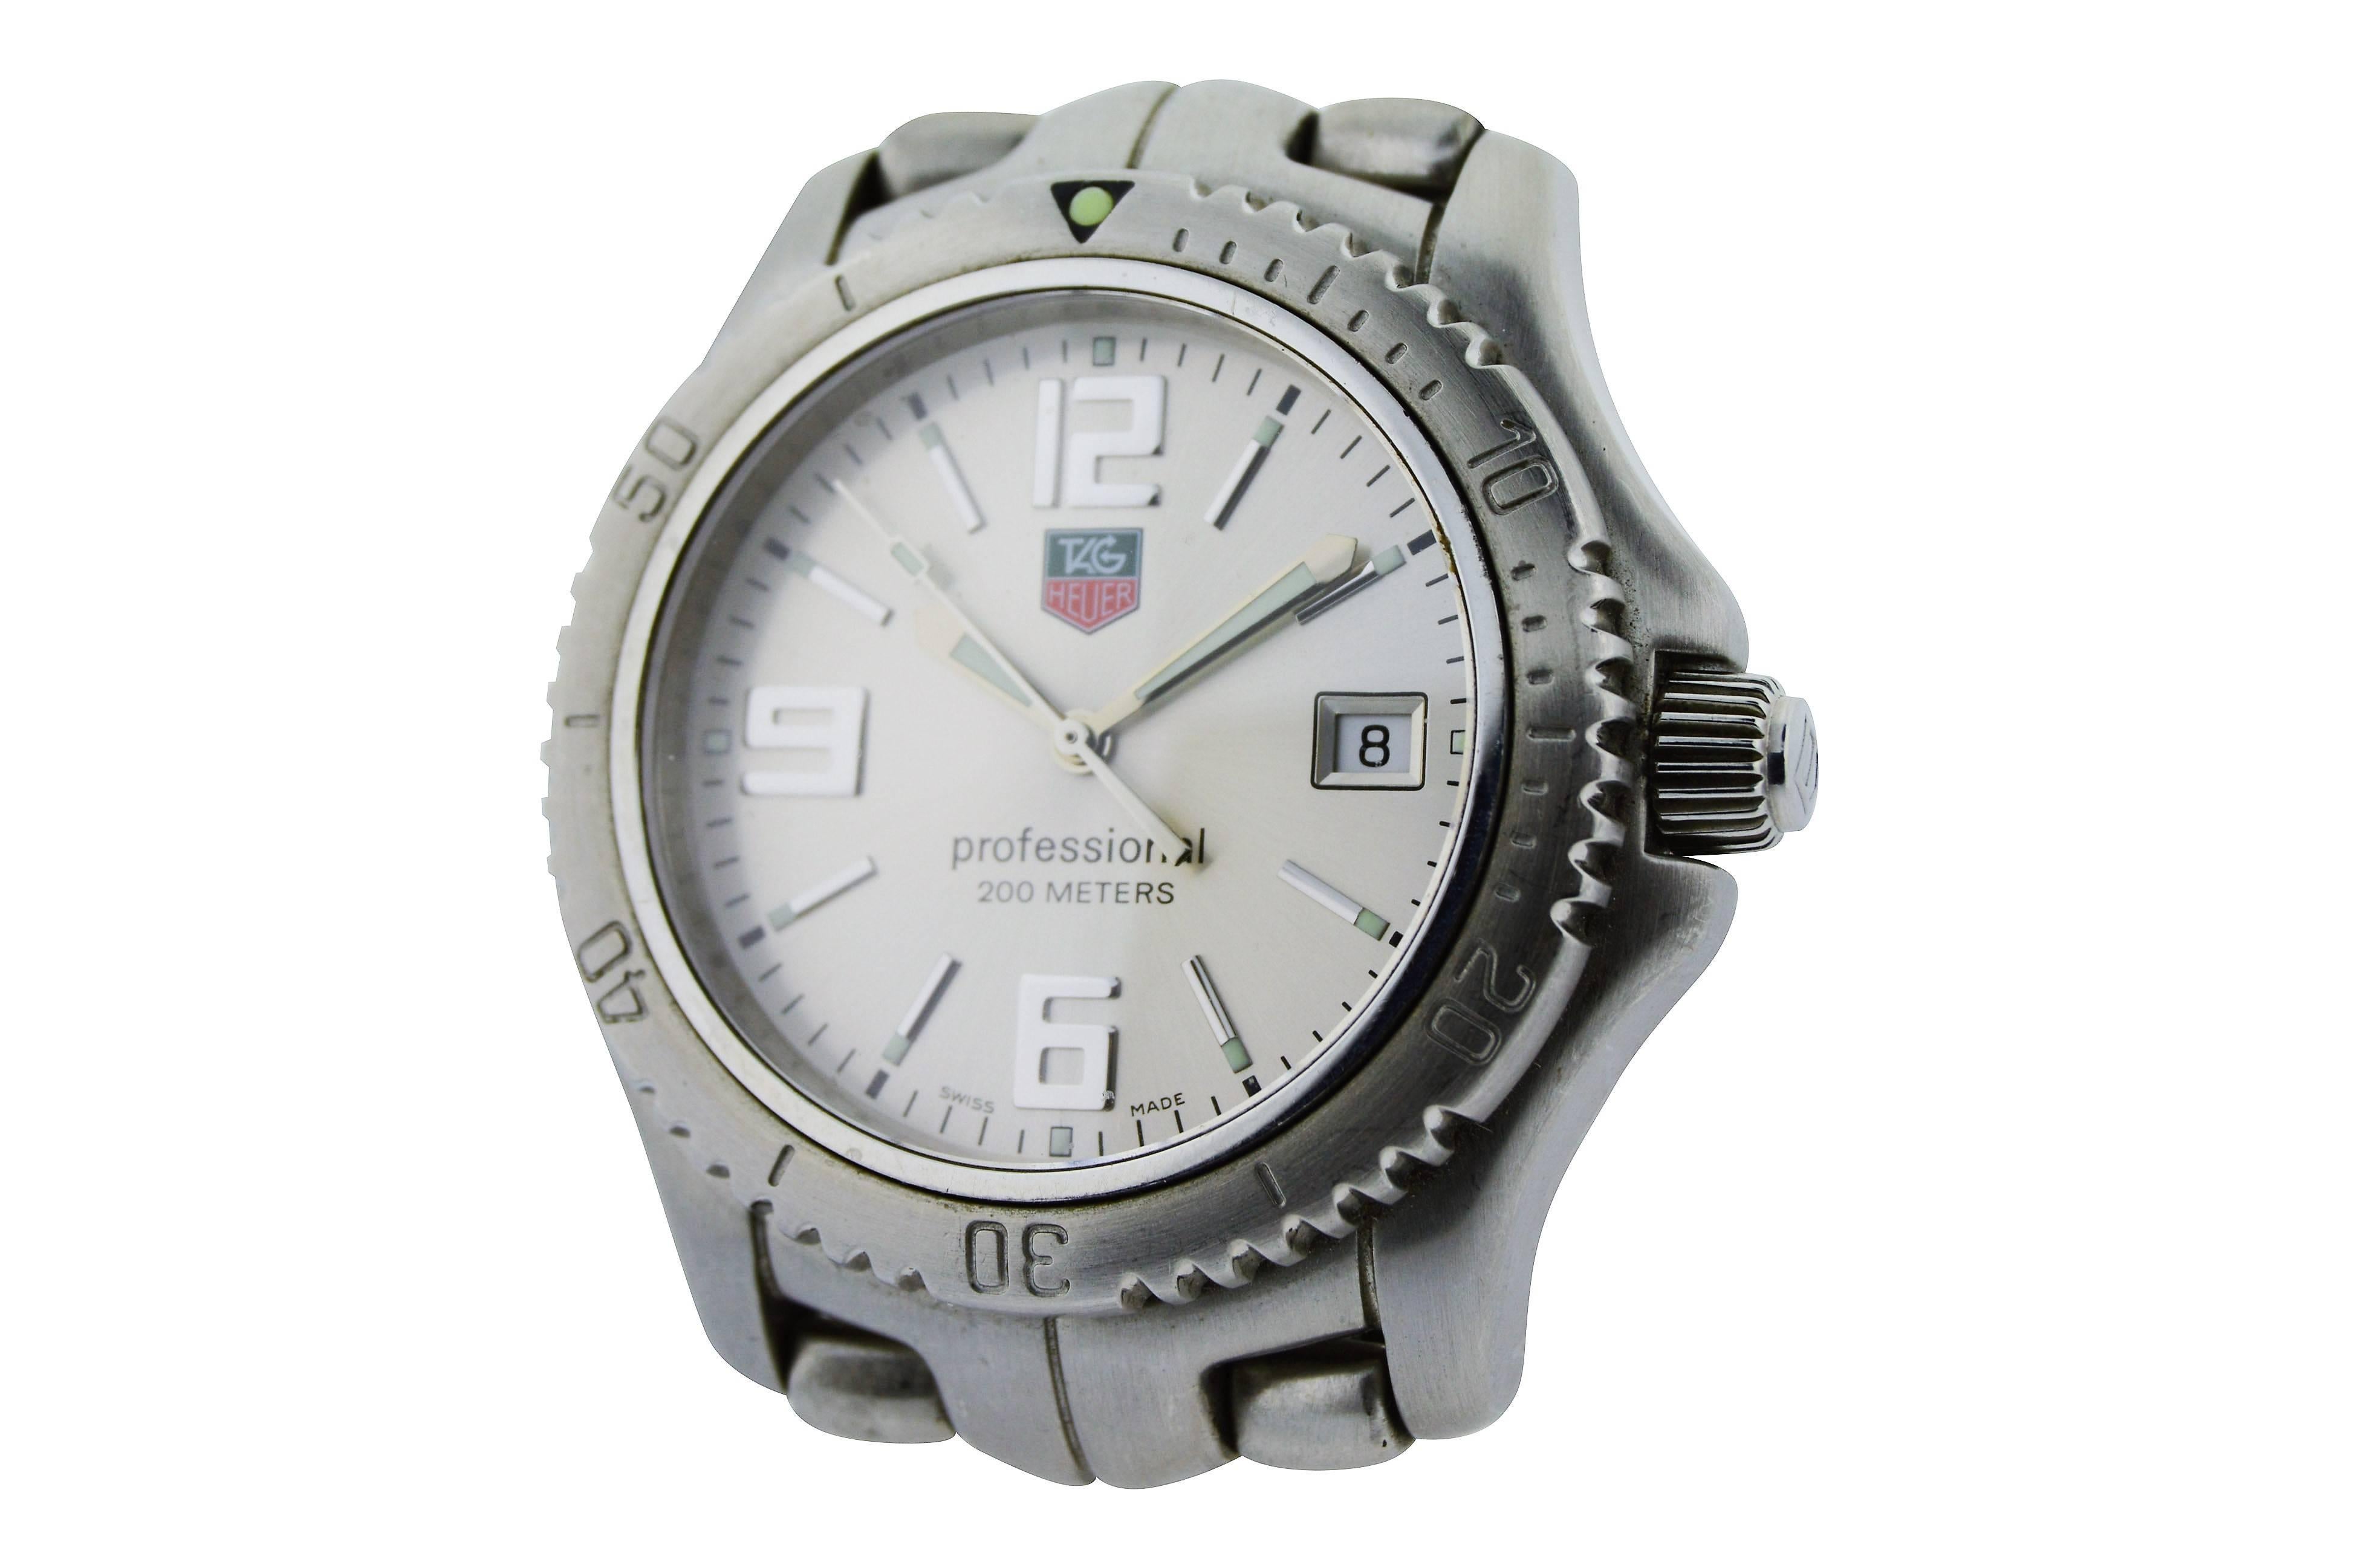 FACTORY / HOUSE: Tag Heuer 
STYLE / REFERENCE: Professional Model with Original Bracelet
METAL / MATERIAL: Stainless Steel 
DIMENSIONS: 44 mm  X  41mm
CIRCA: 1999
MOVEMENT / CALIBER: Quartz / Cal. 955.112
DIAL / HANDS: Original / Pyramid